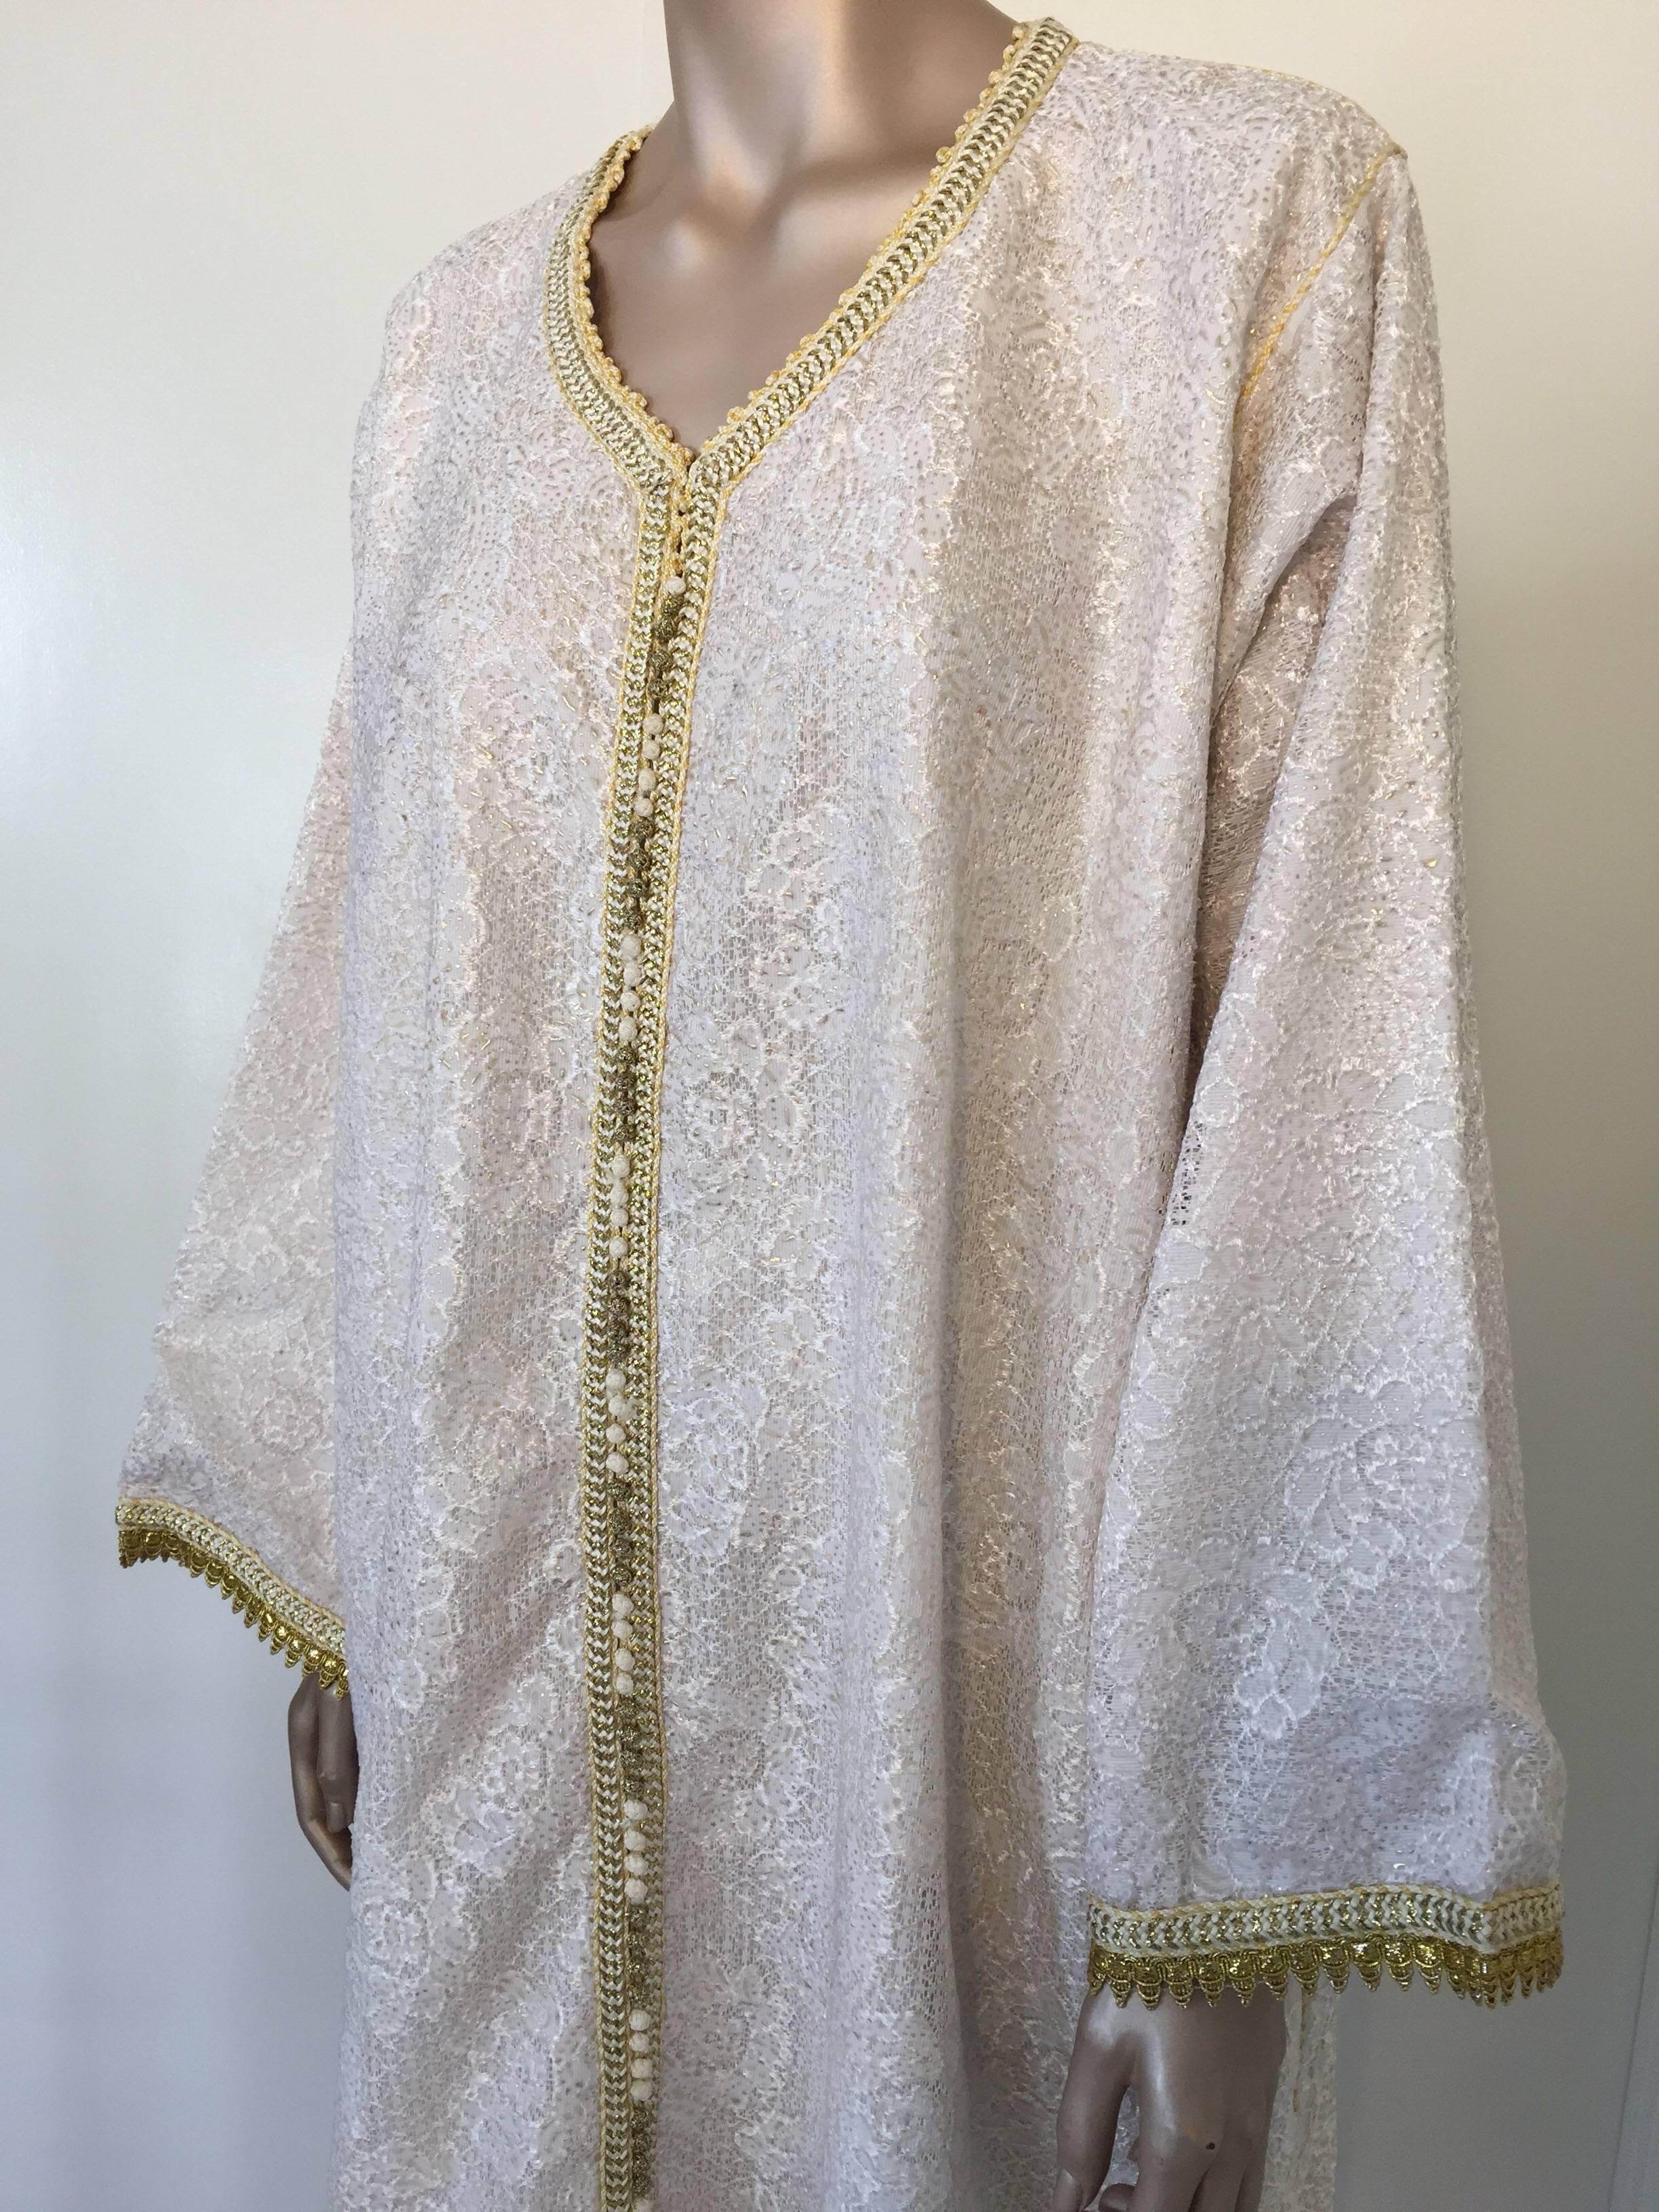 Moroccan caftan, evening or interior white and gold lace dress kaftan with gold trim.
Handmade vintage exotic 1970s metallic white and gold caftan gown, ceremonial Kaftan from North Africa, Morocco.
The luminous white and gold metallic maxi dress